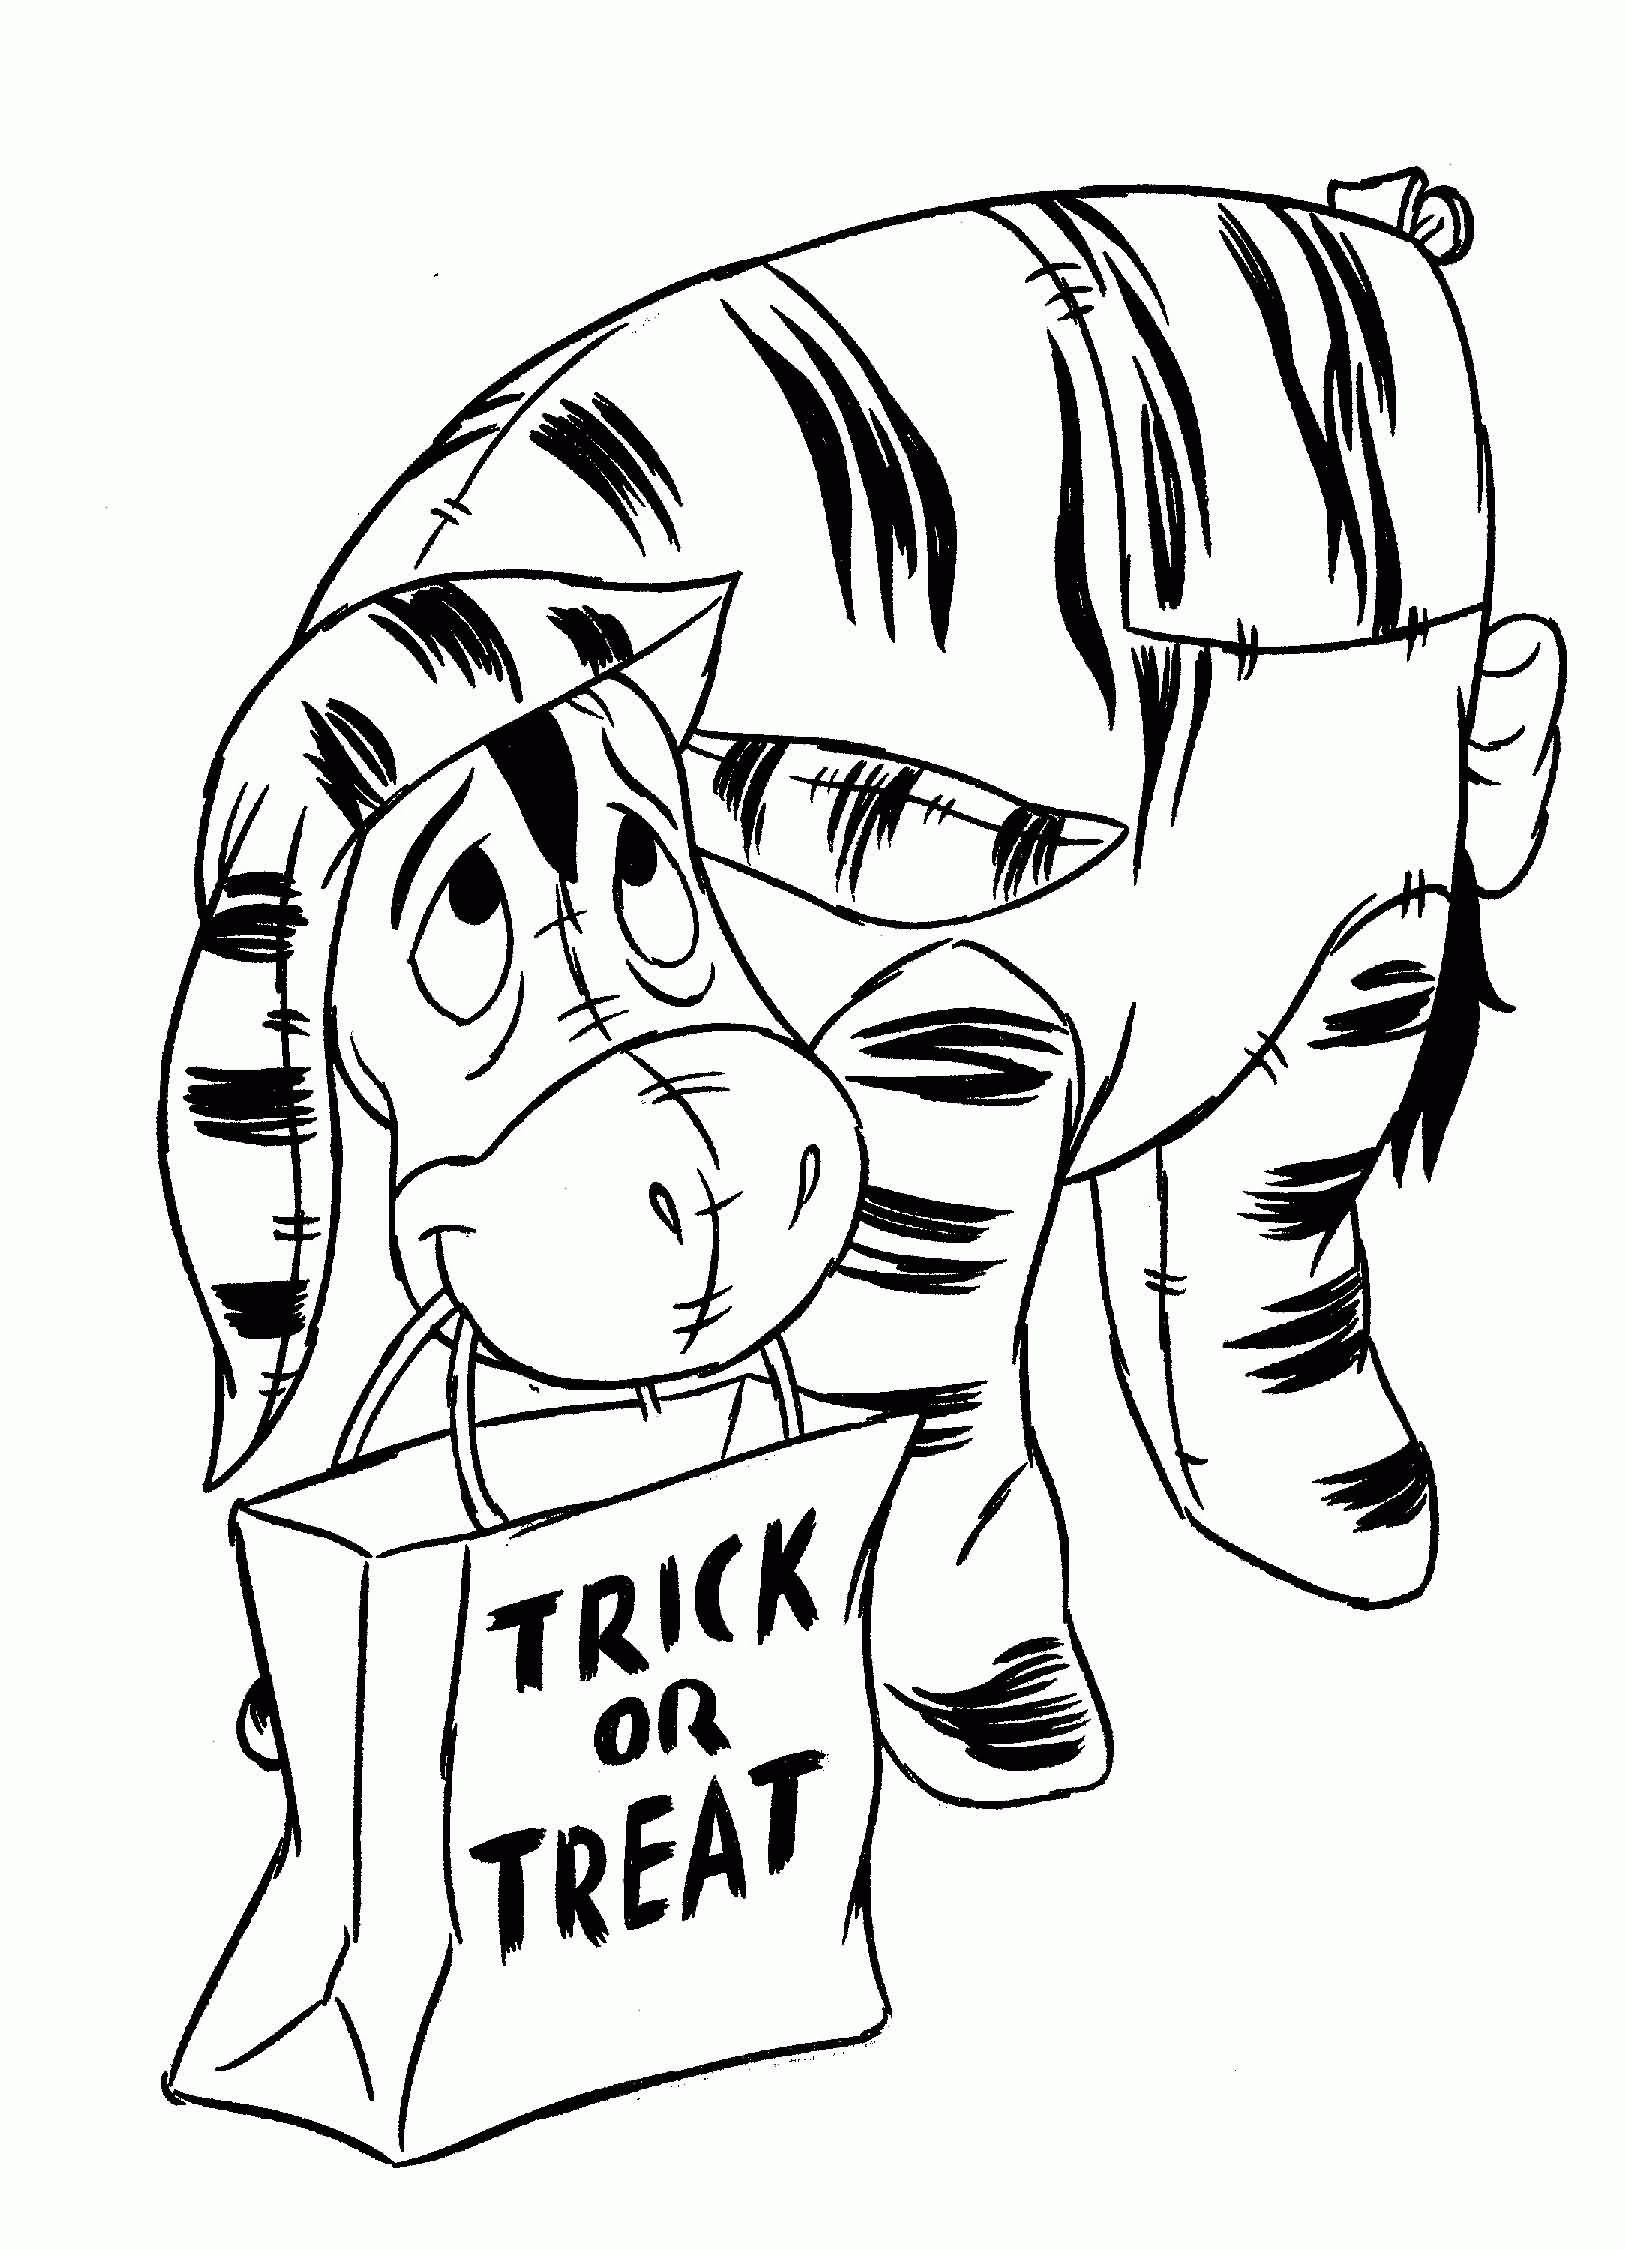 Coloring Page - Halloween coloring pages 77